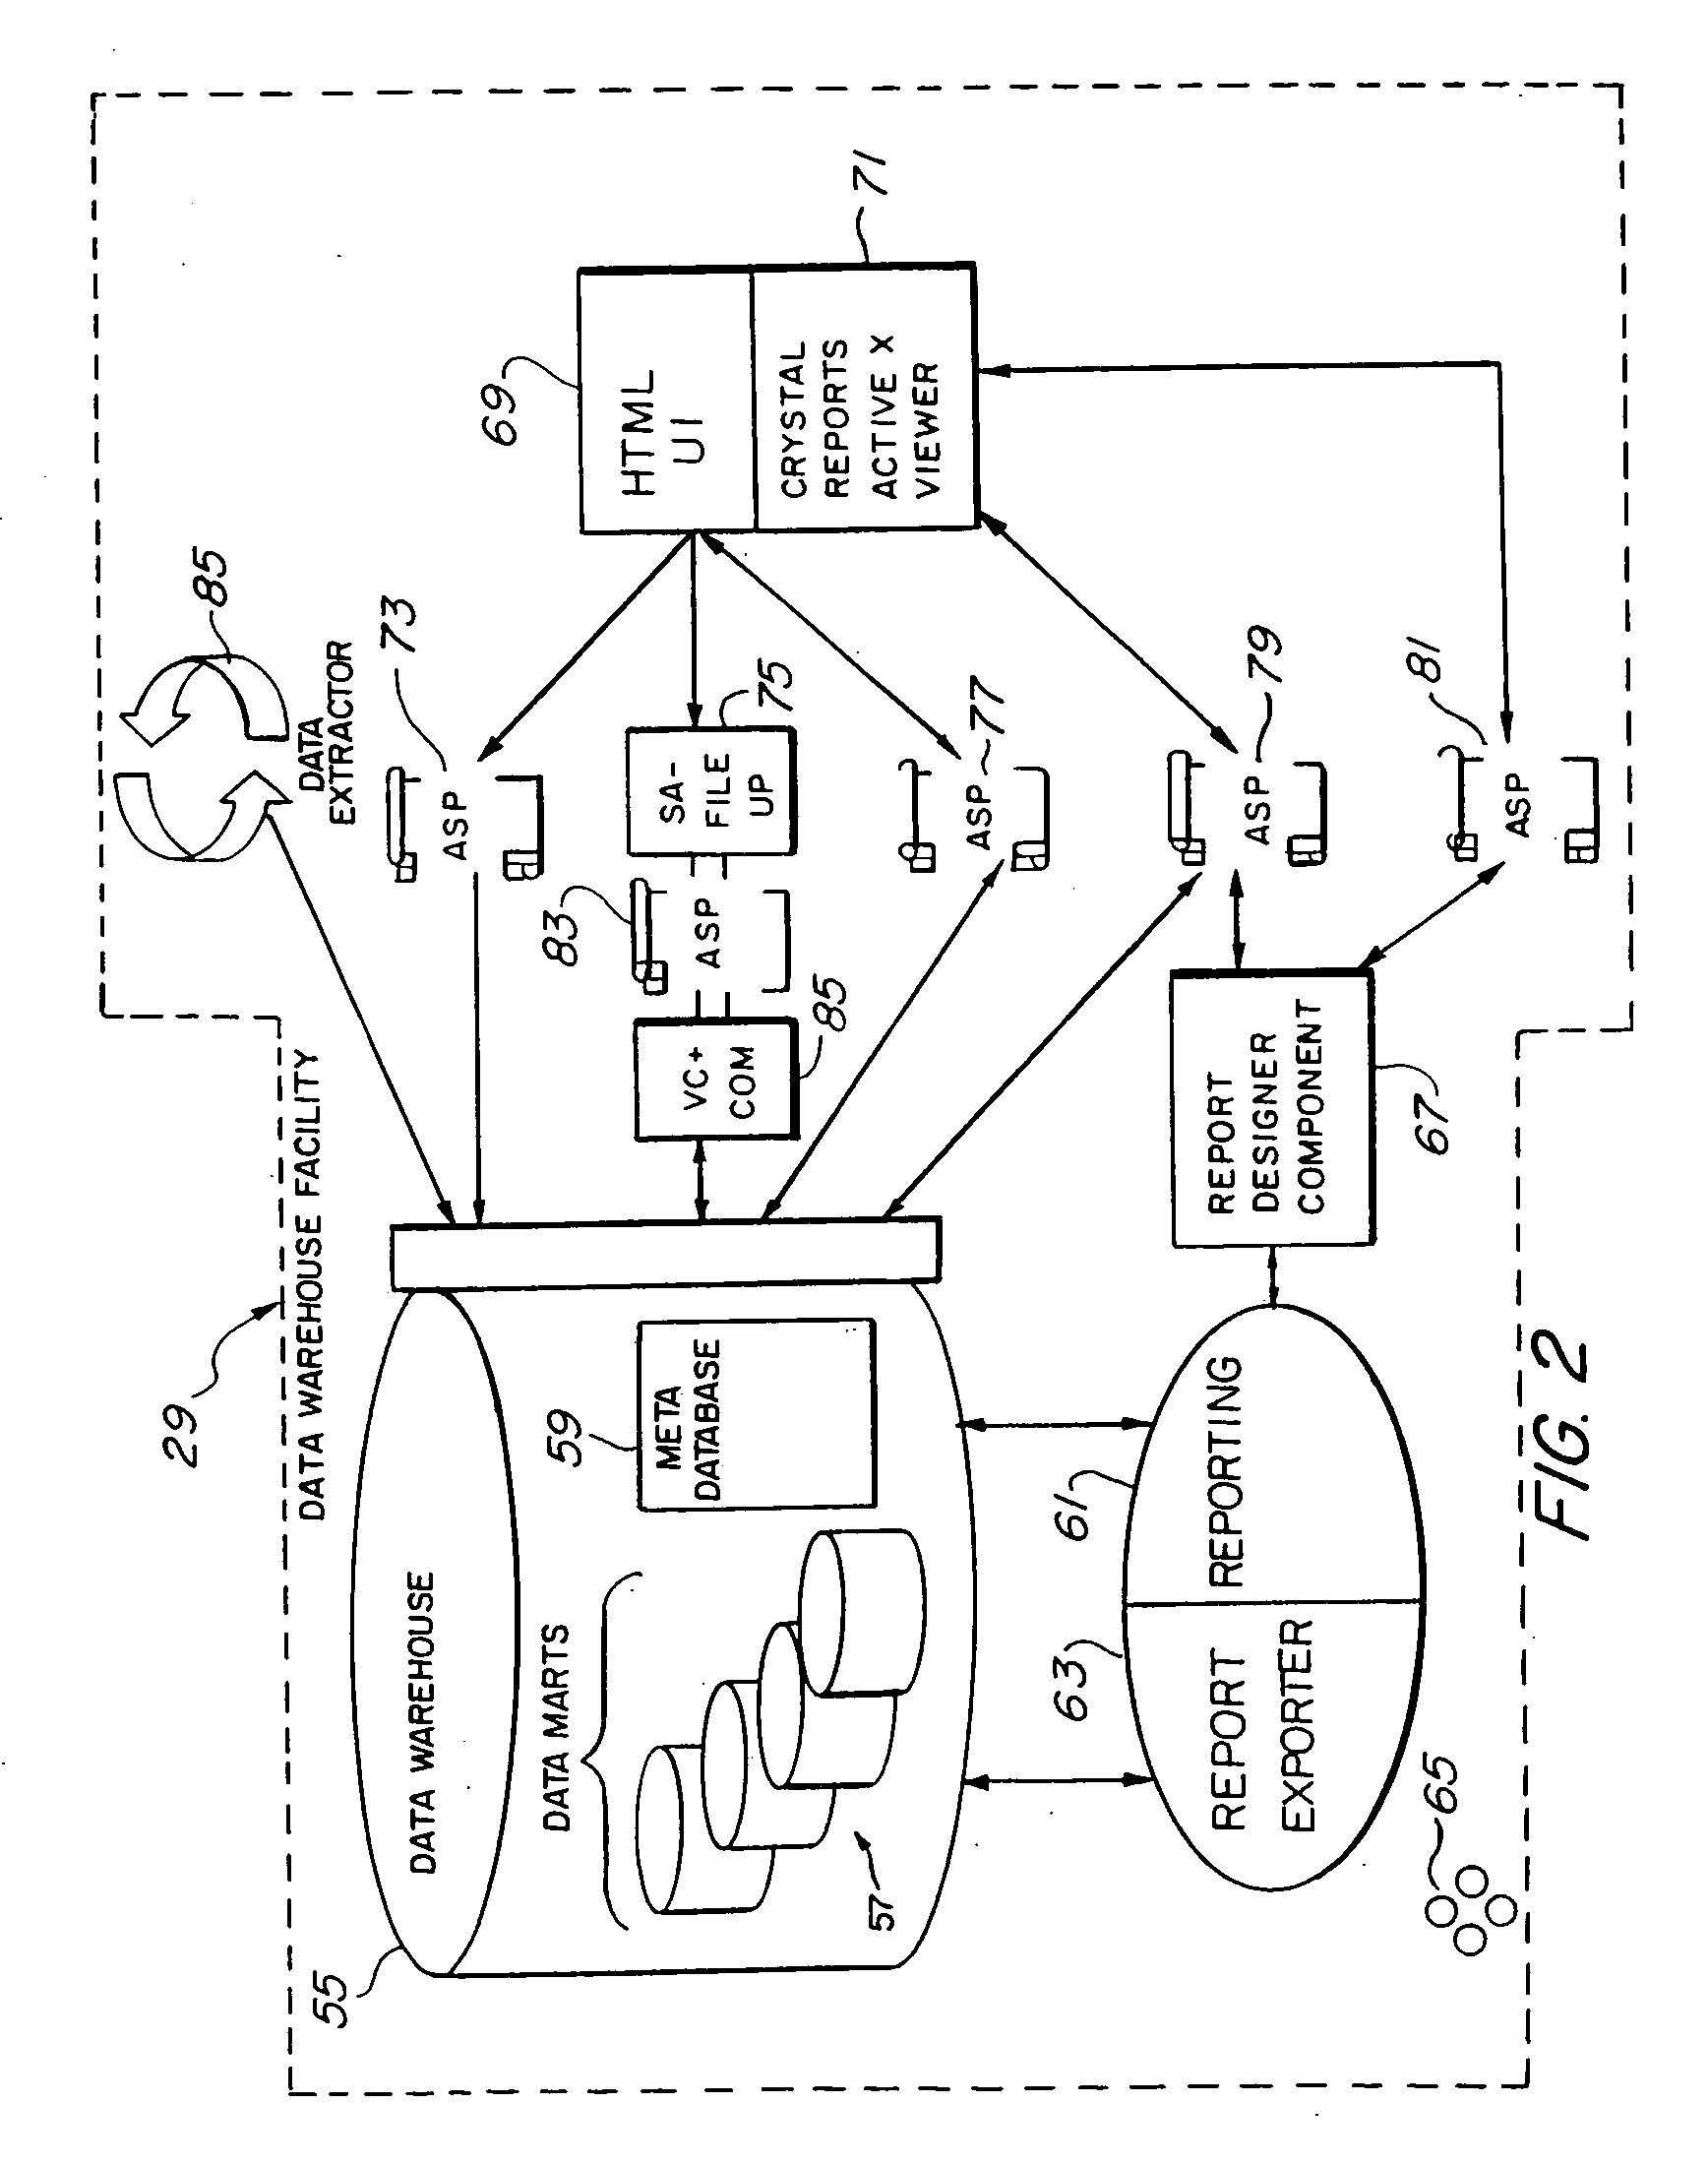 System and method for acquiring, storing, processing and presenting data accumulated through an in-flight aircraft server